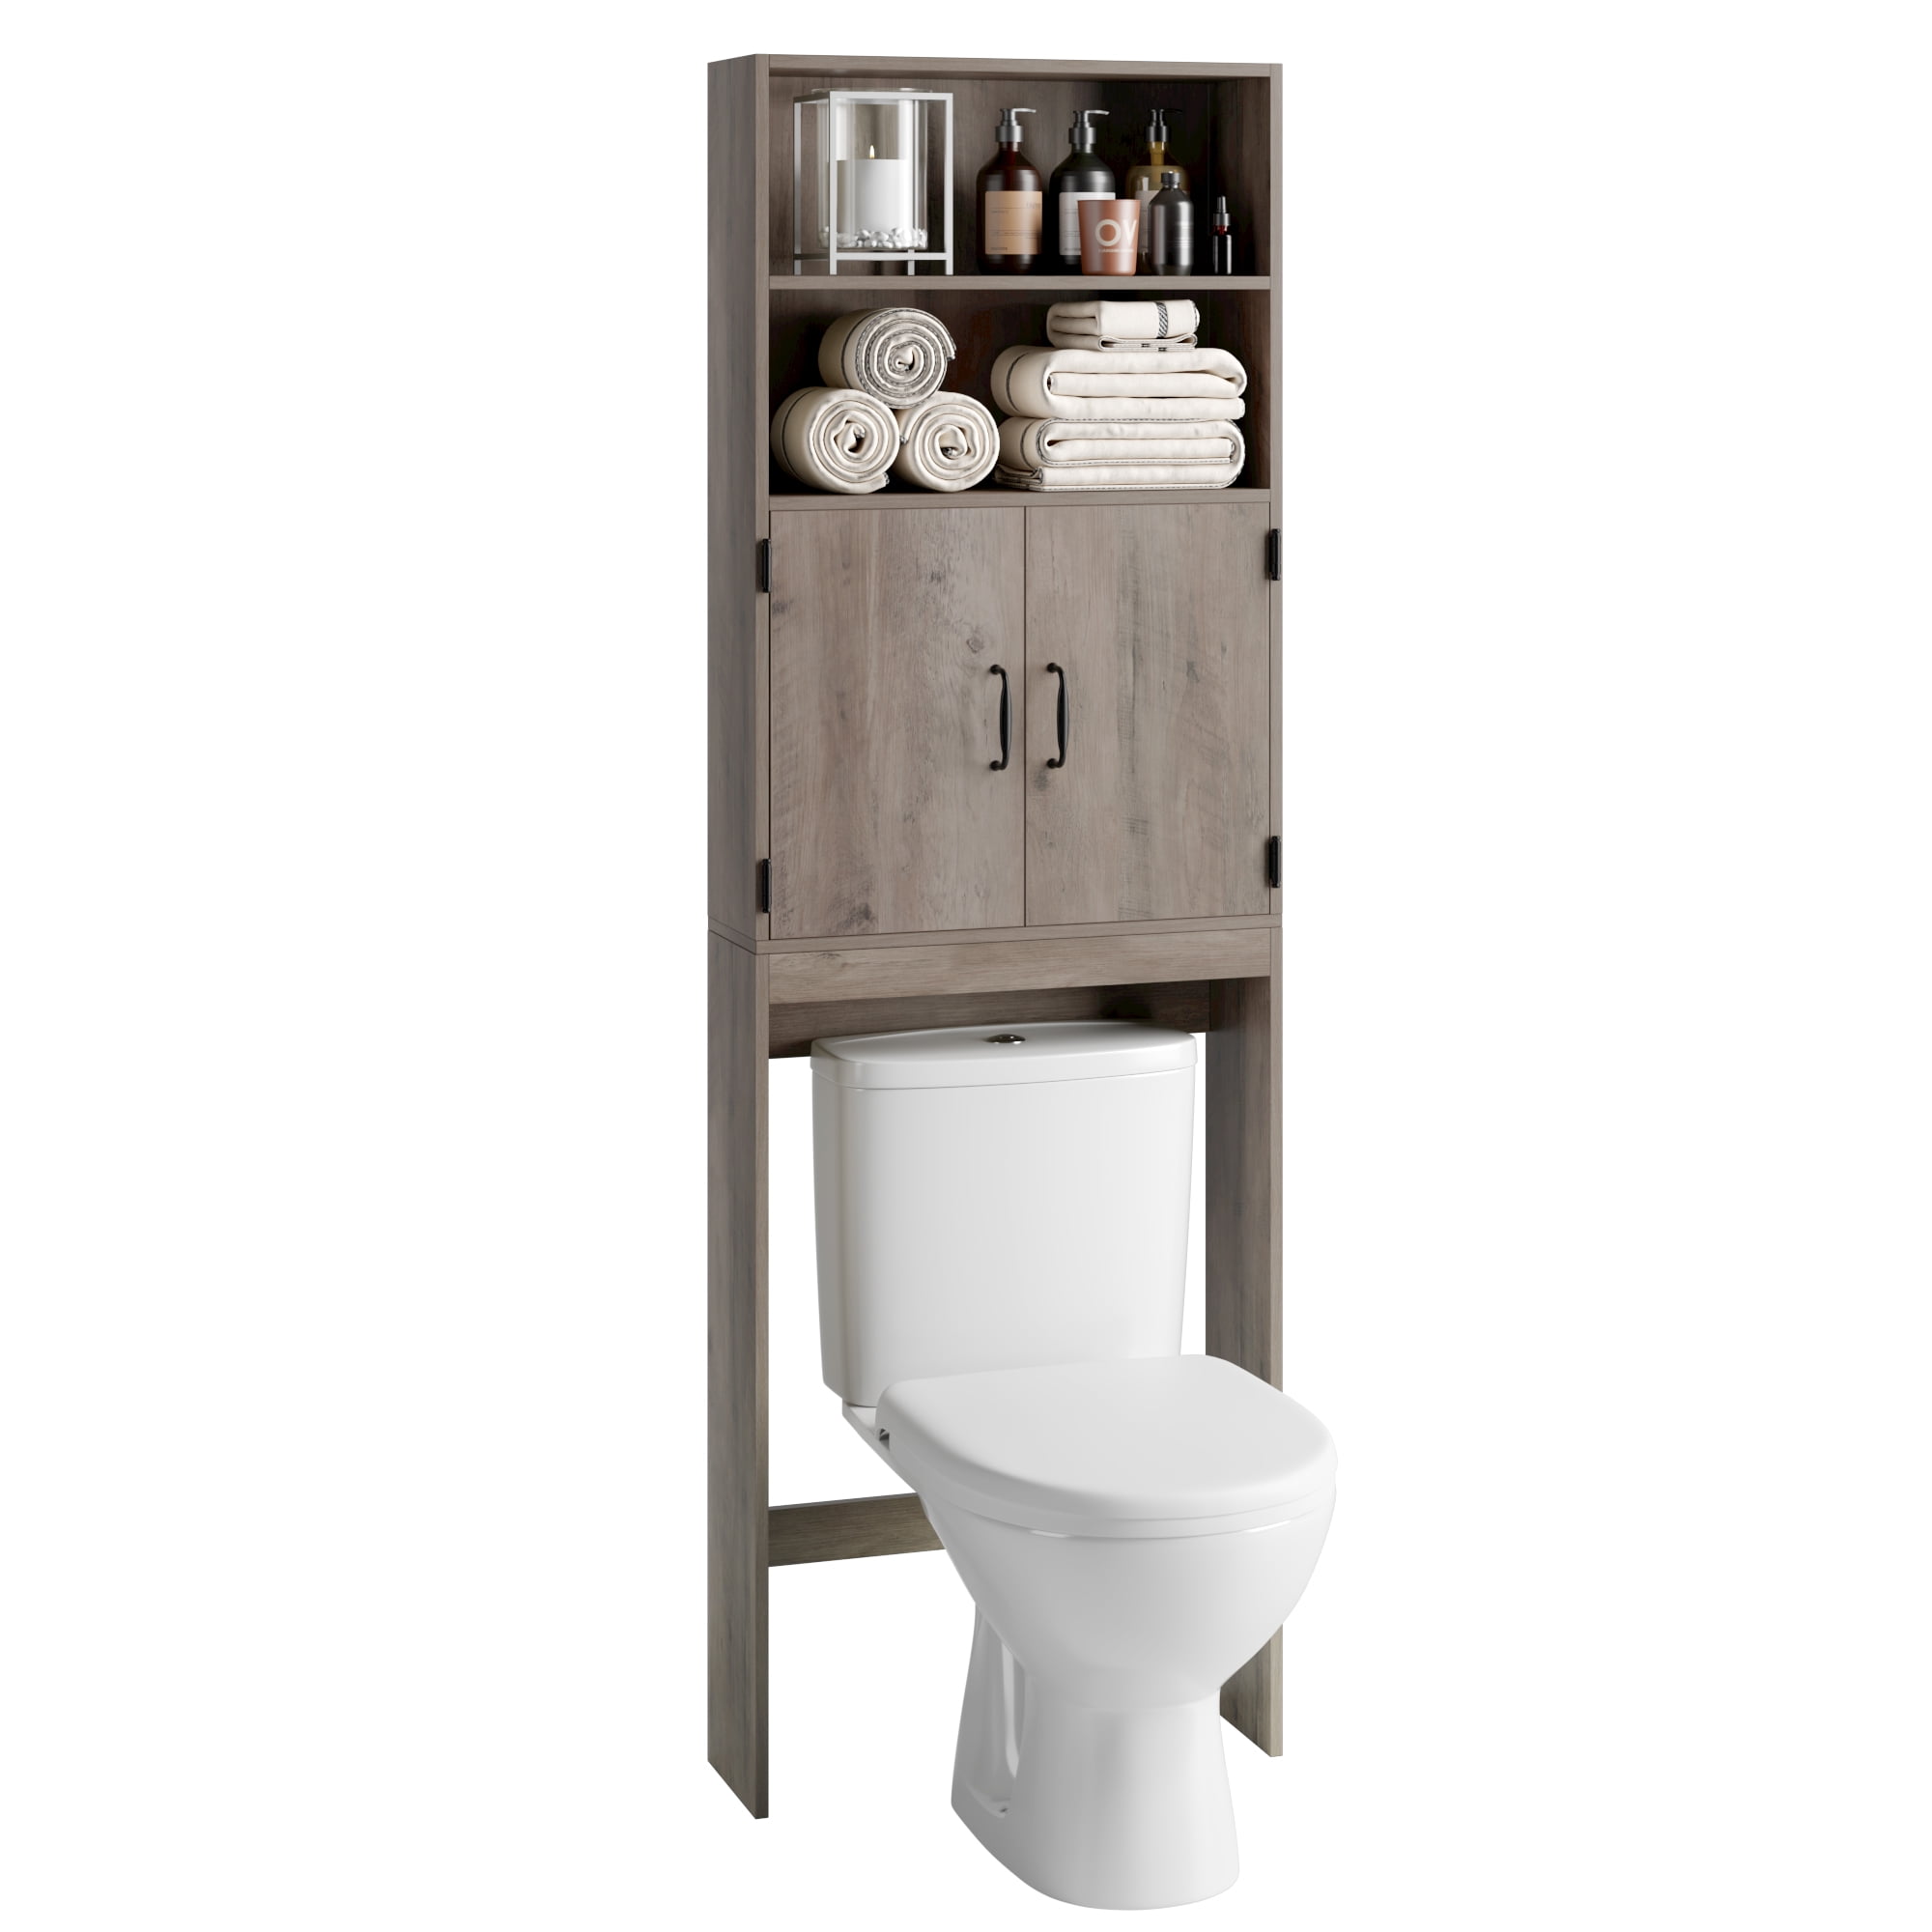 Homeika Bathroom Storage Cabinet with 2 Doors and 2 Shelves, 4 Tier Design  Toilet Paper Storage Stand for Small Space and Corner, L6.7 x W6 x H31